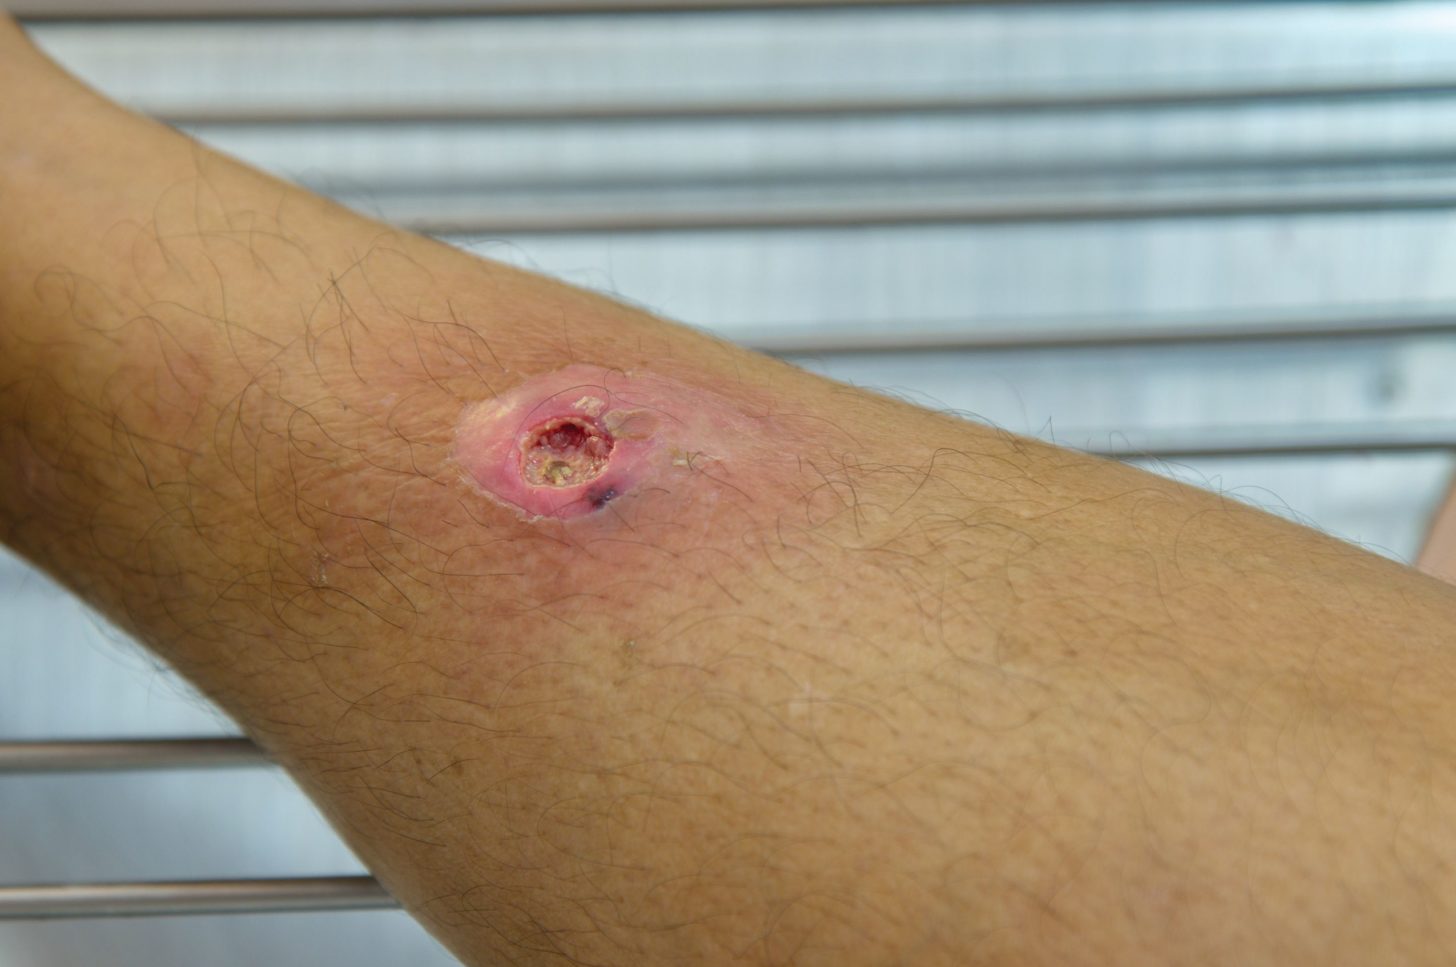 Antibiotics Increase Cure Rate From Small Skin Abscesses Compared With